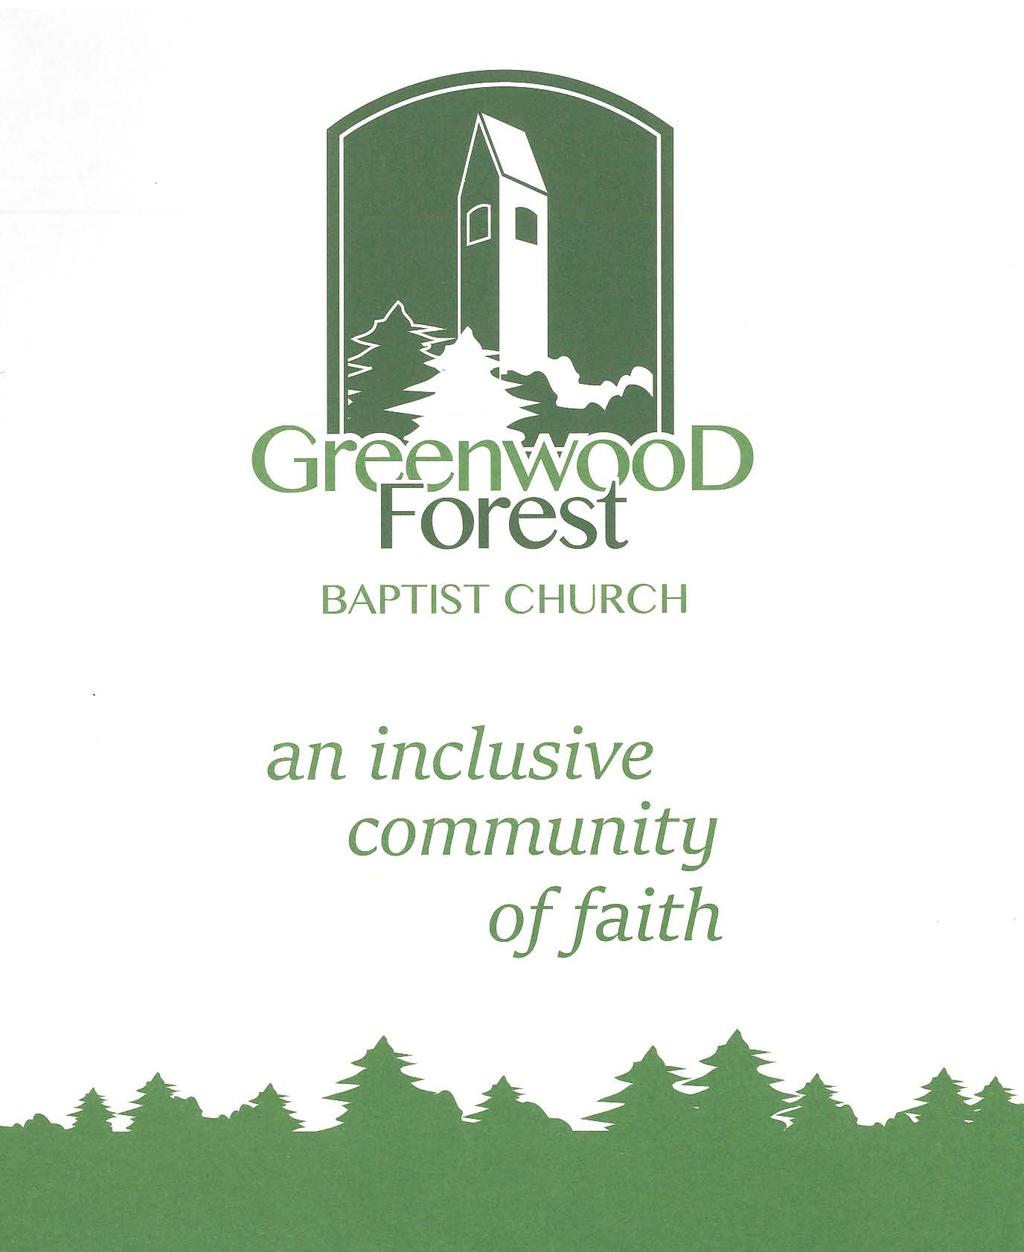 GREENWOOD FOREST BAPTIST CHURCH The Worship of God The Fifteenth Sunday After Pentecost September 2, 2018 Chiming of the Hour Gathering Hymn 490 (v.